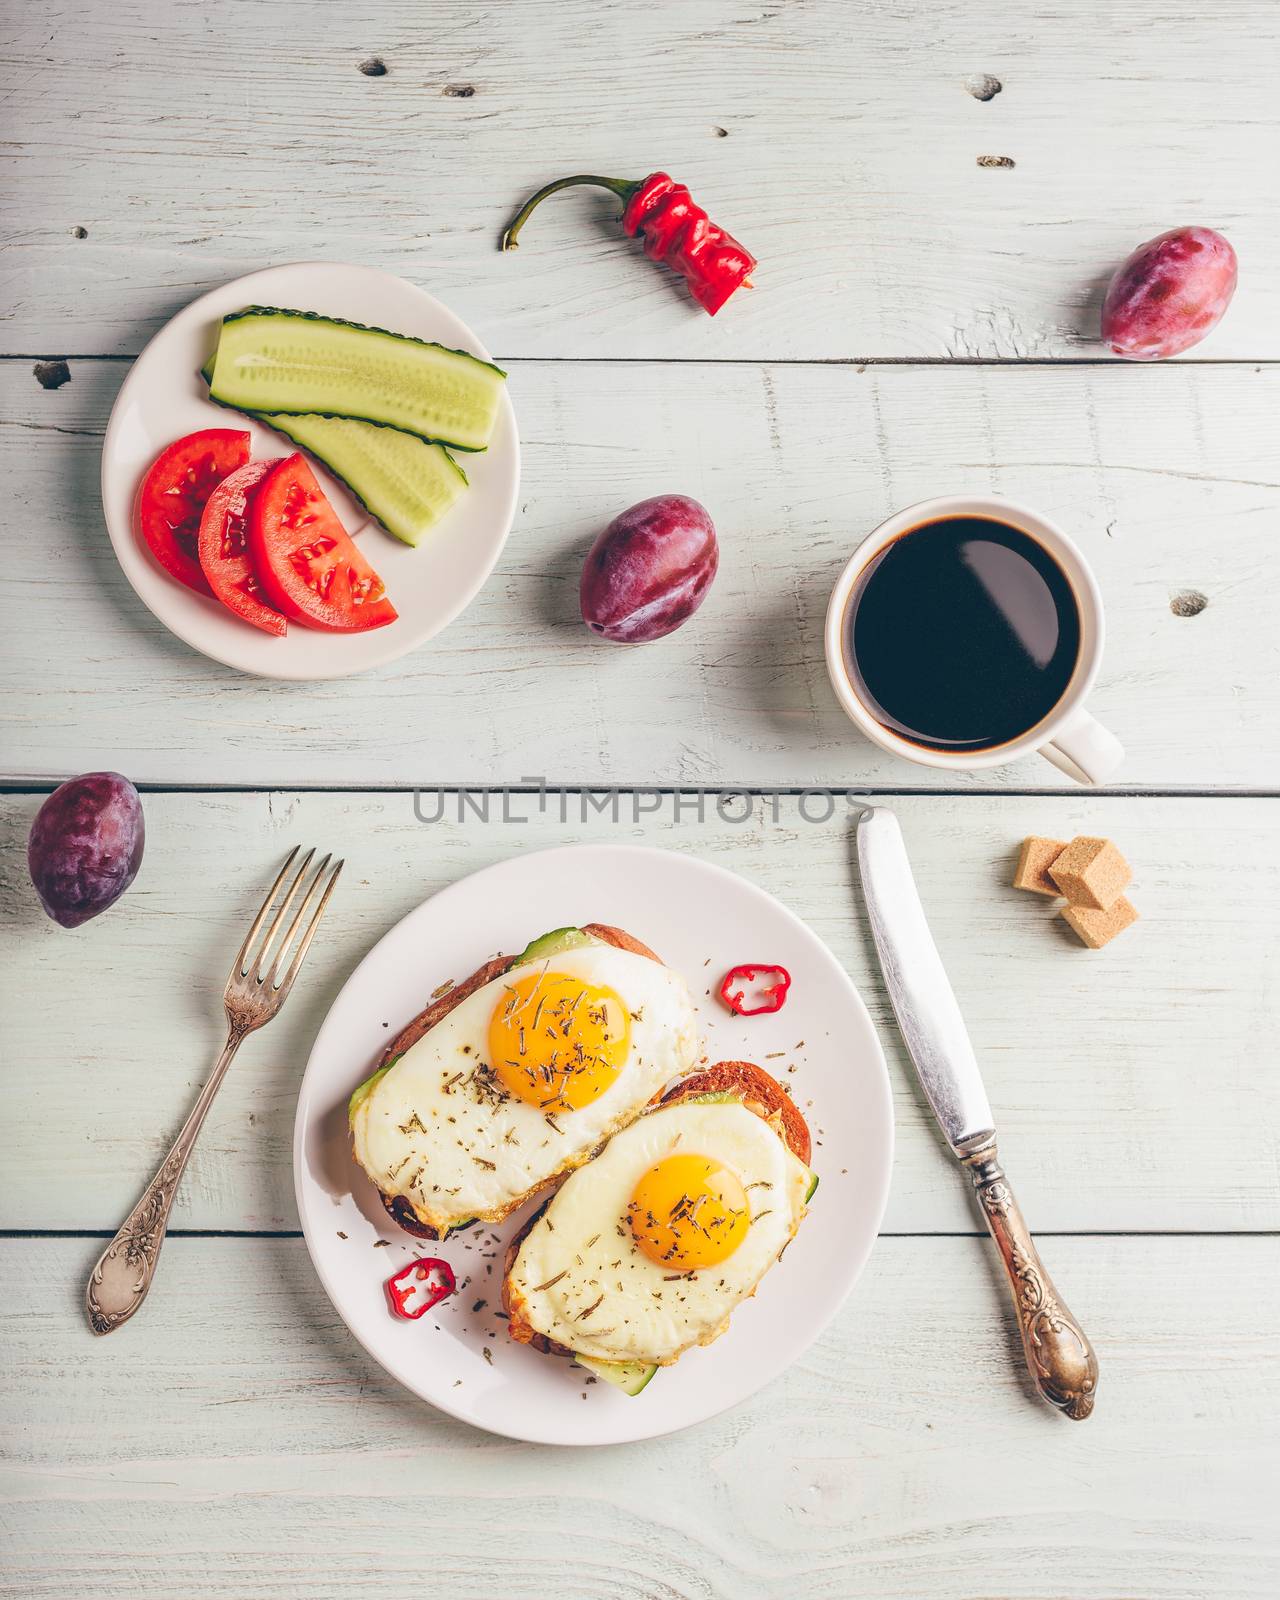 Breakfast toasts with vegetables and fried egg on white plate, cup of coffee and some fruits over wooden background. Clean eating food concept. View from above.